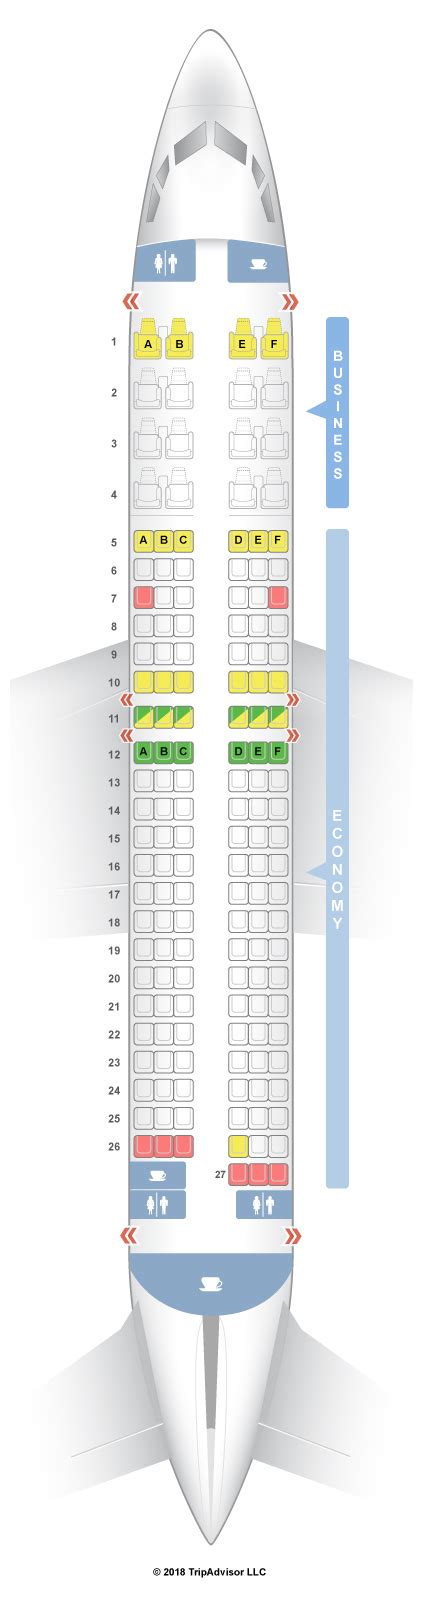 Turkish Airlines Boeing 737 800 Seat Map Hot Sex Picture